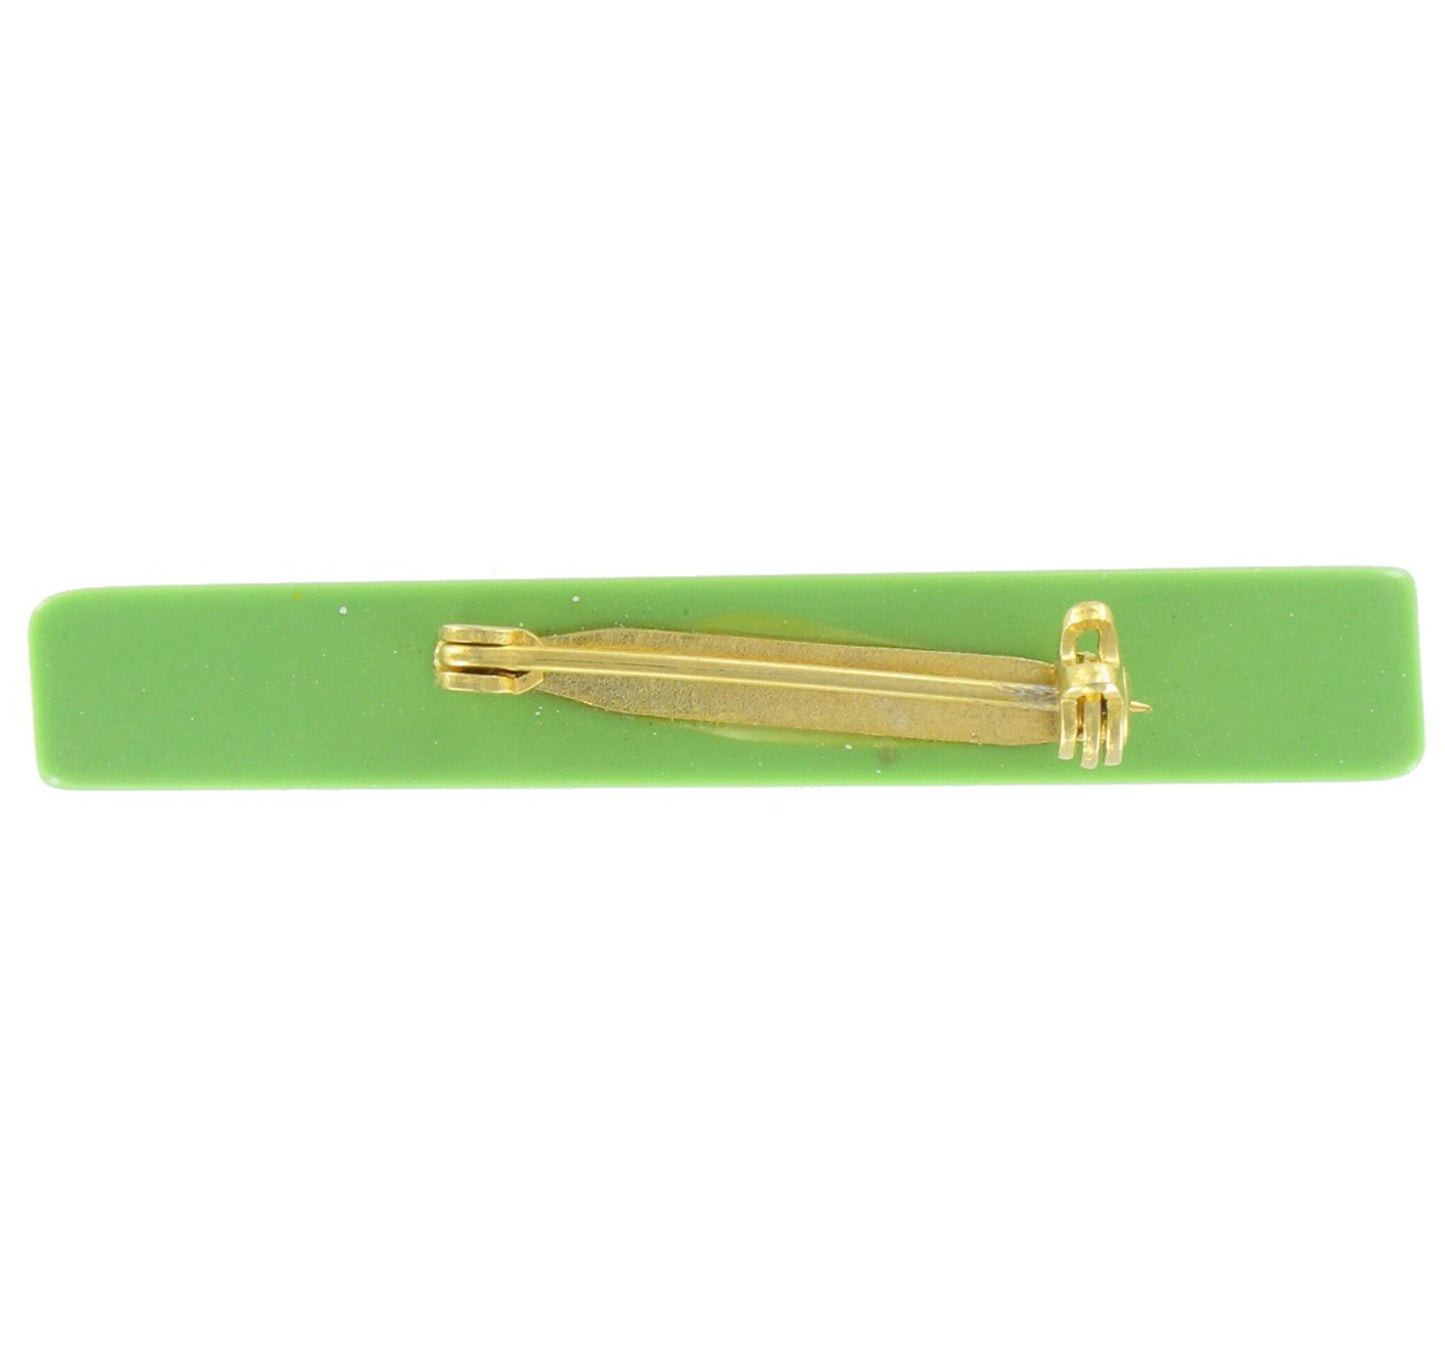 Vintage Lucite Green Ladies Scarf Tie Bar Pin Brooch Diagonal Accent 2"